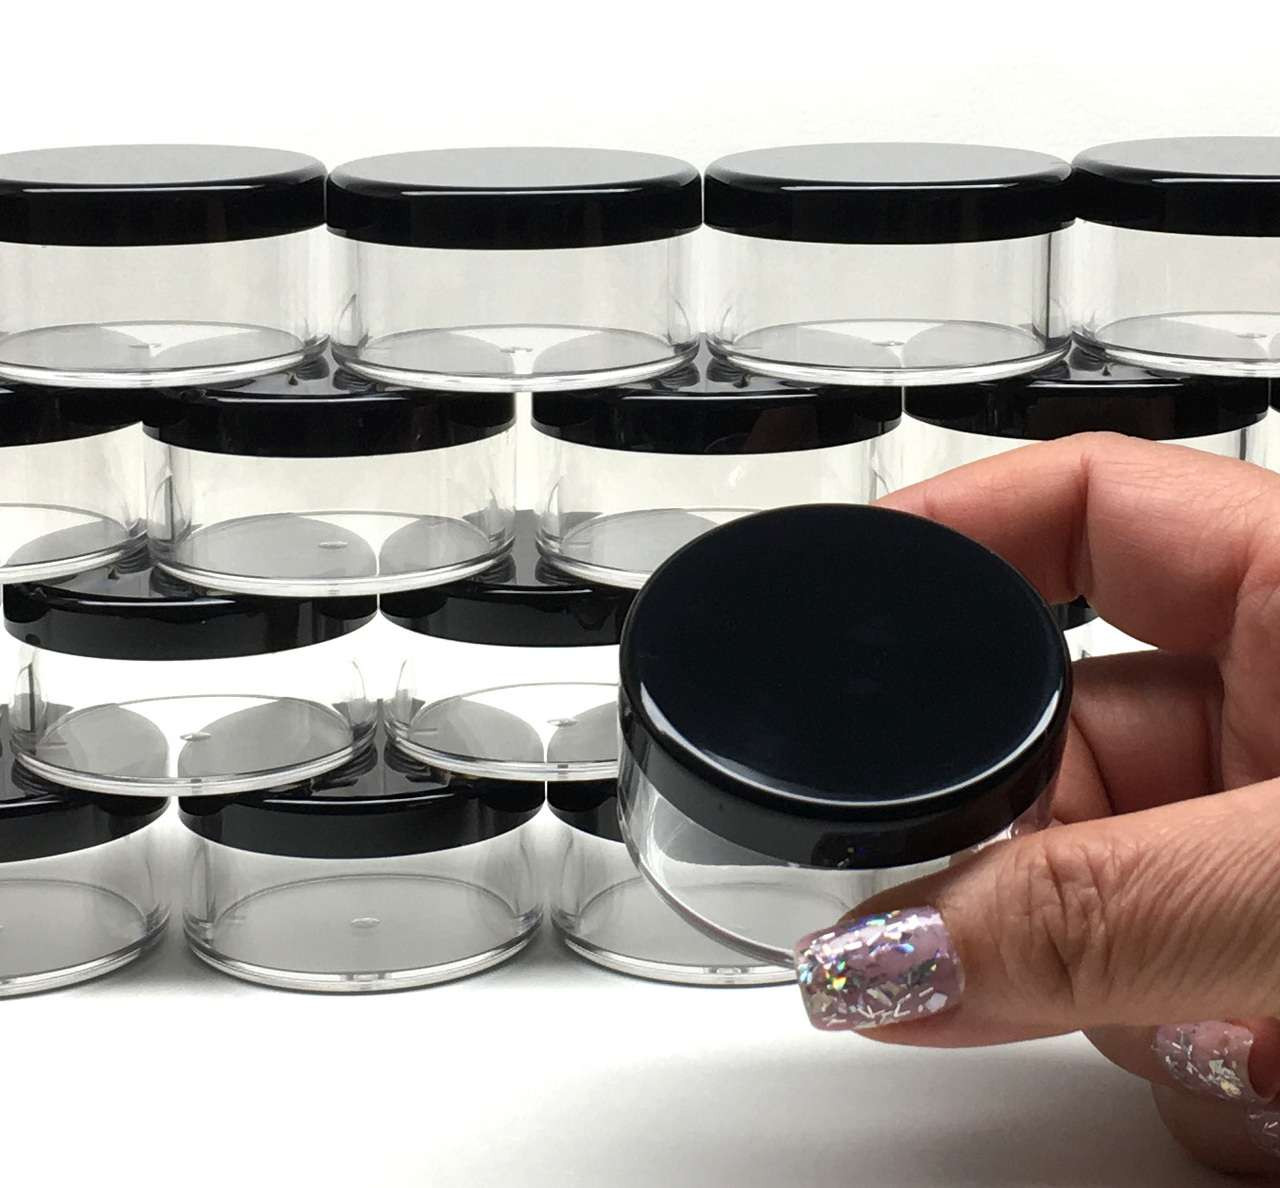 https://cdn11.bigcommerce.com/s-qd7k5gxi/images/stencil/1280x1280/products/252/6365/Cosmetic-Jars-Plastic-Beauty-Containers-30-Gram-Black-Clear-Lid_3853__19559.1660975701.jpg?c=2?imbypass=on